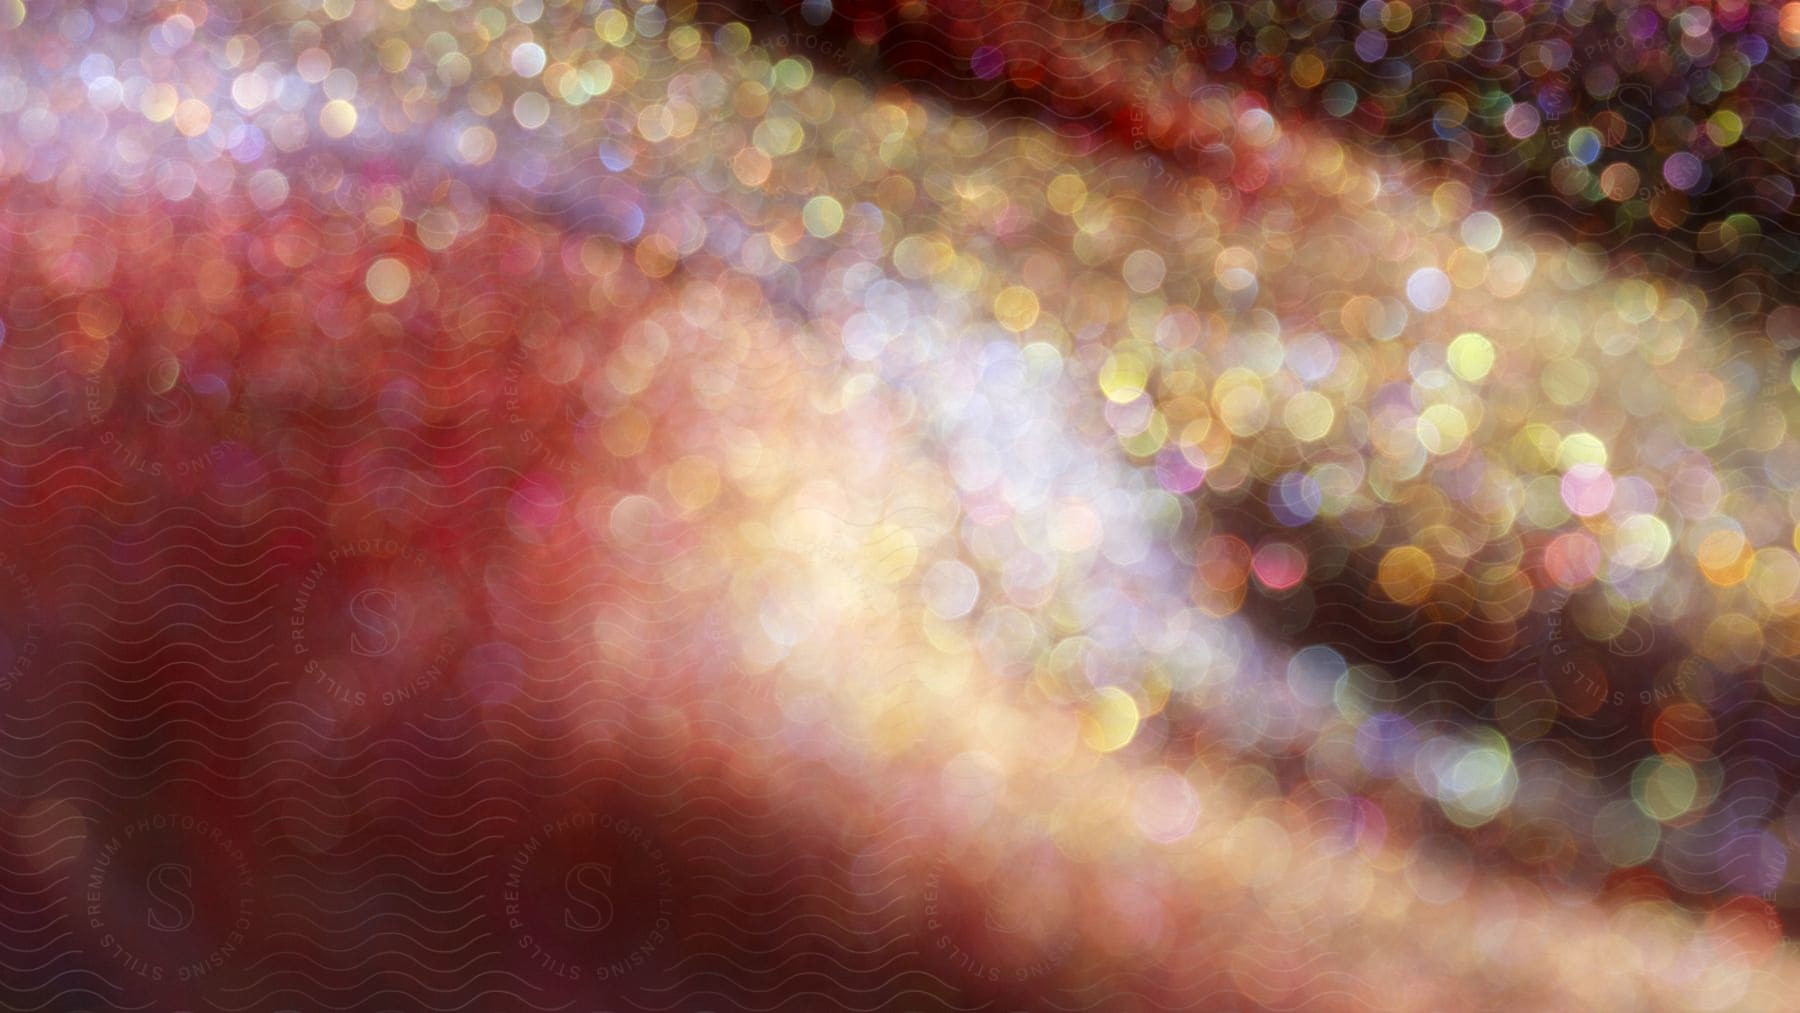 Abstract and blurred art with shiny pigmentation.